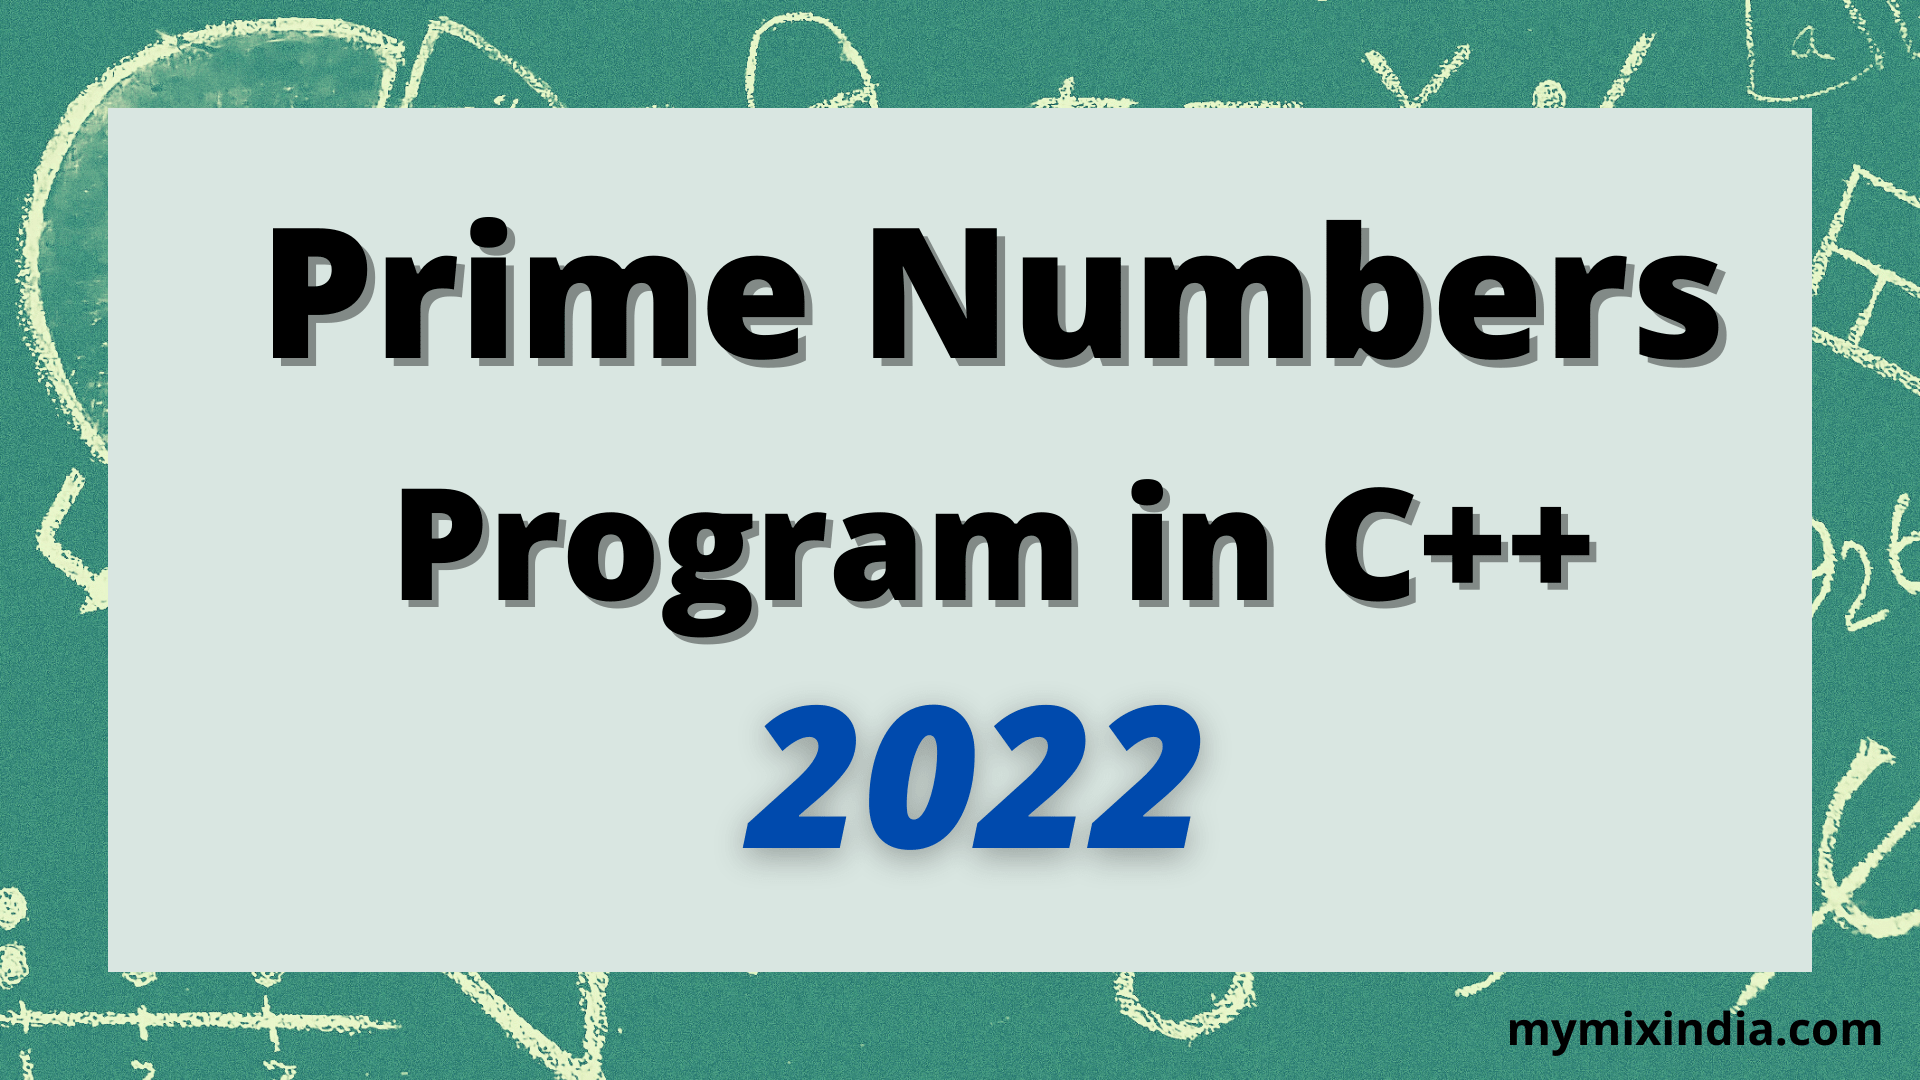 program-to-print-prime-number-in-cpp-2022-mymixindia.com